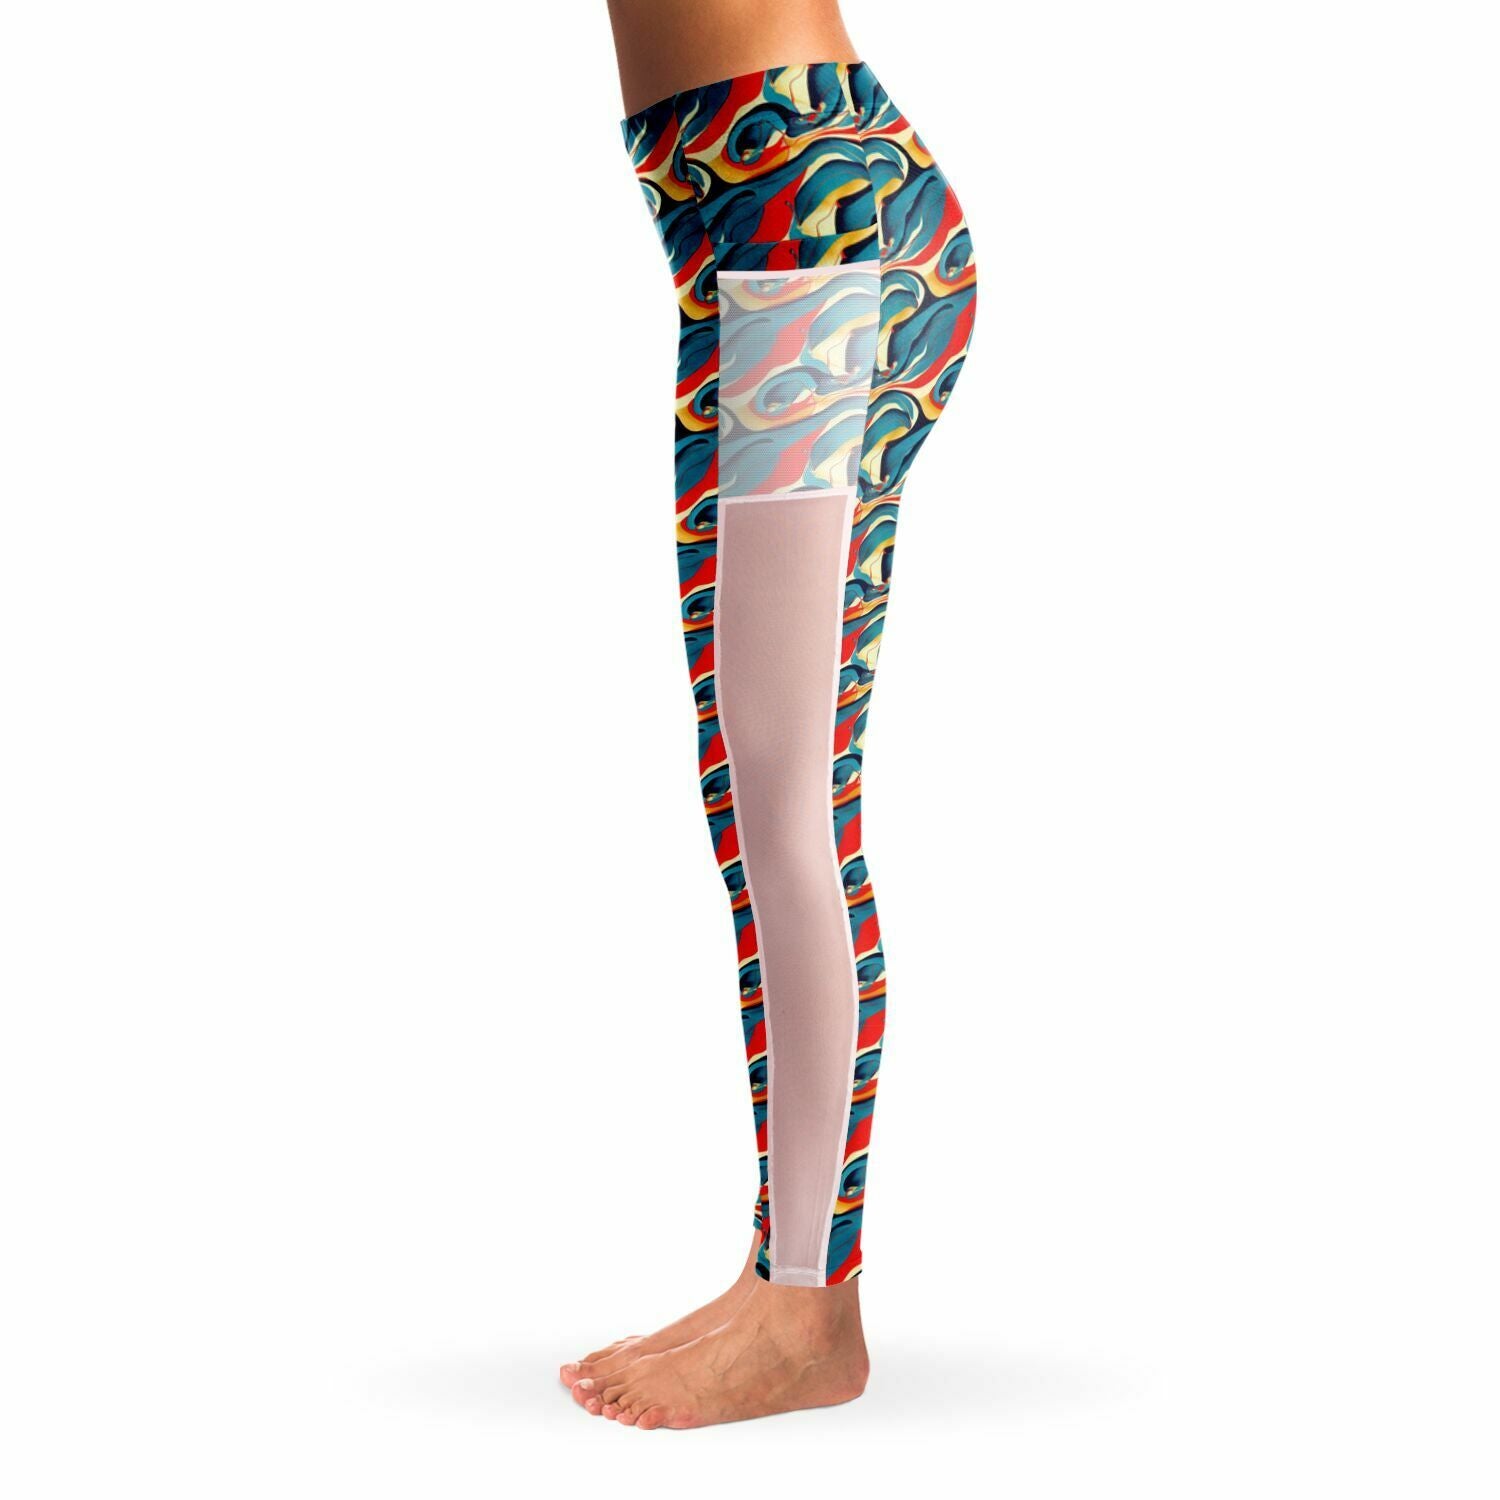 Flowing Mesh Leggings: Breathable Panels with Abstract Patterns